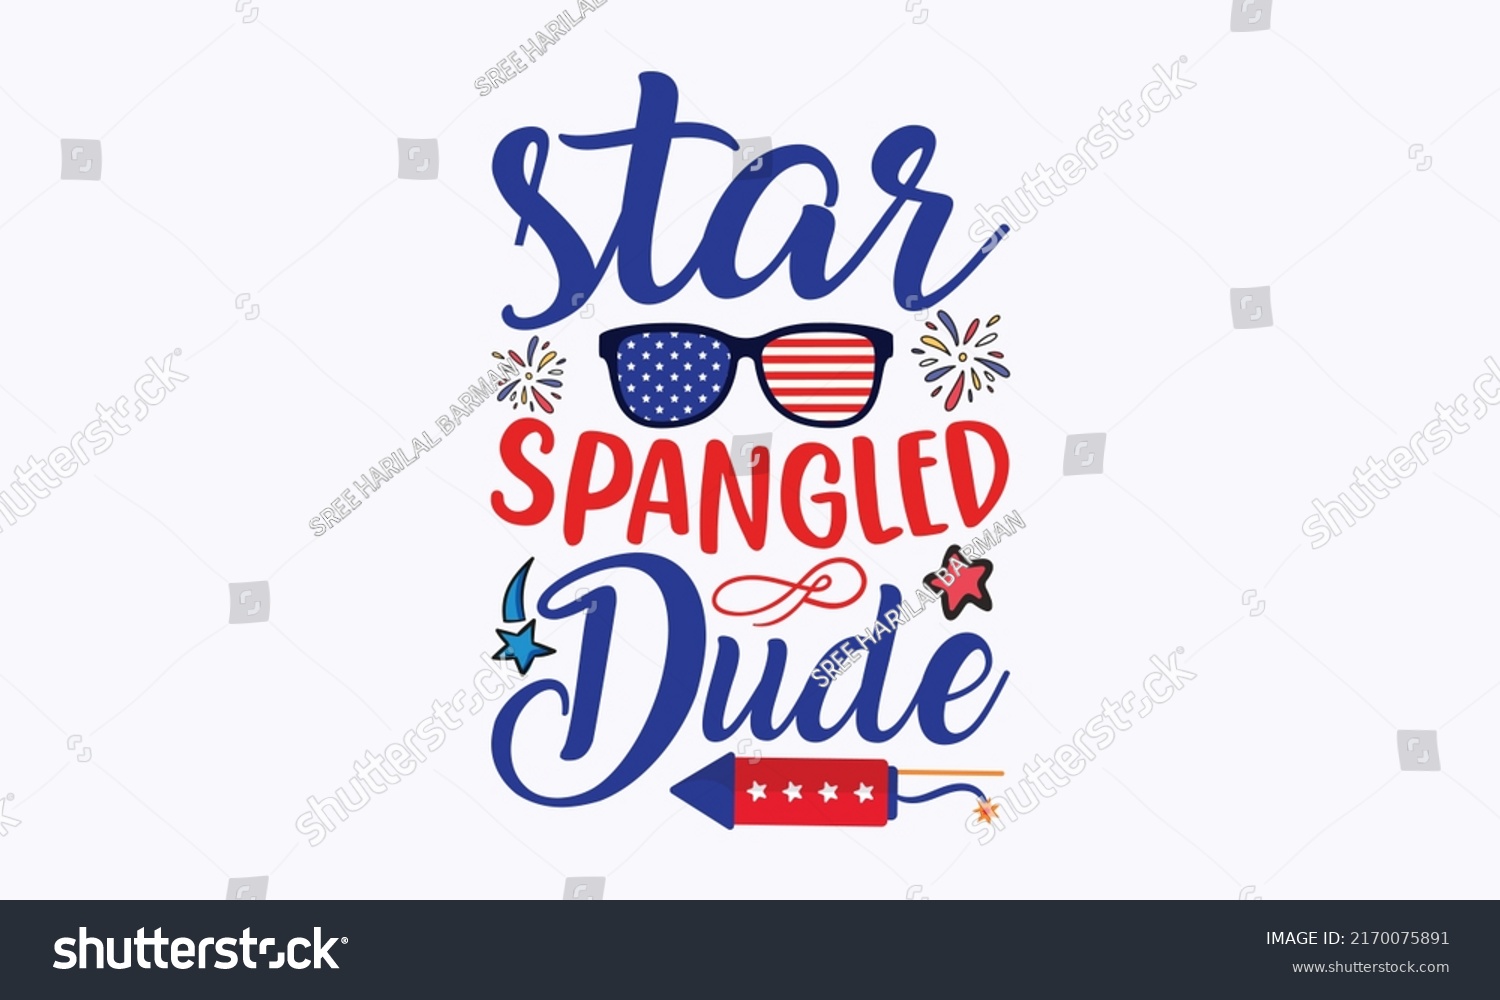 SVG of star spangled dude -  4th of July fireworks svg for design shirt and scrapbooking. Good for advertising, poster, announcement, invitation, Templet svg